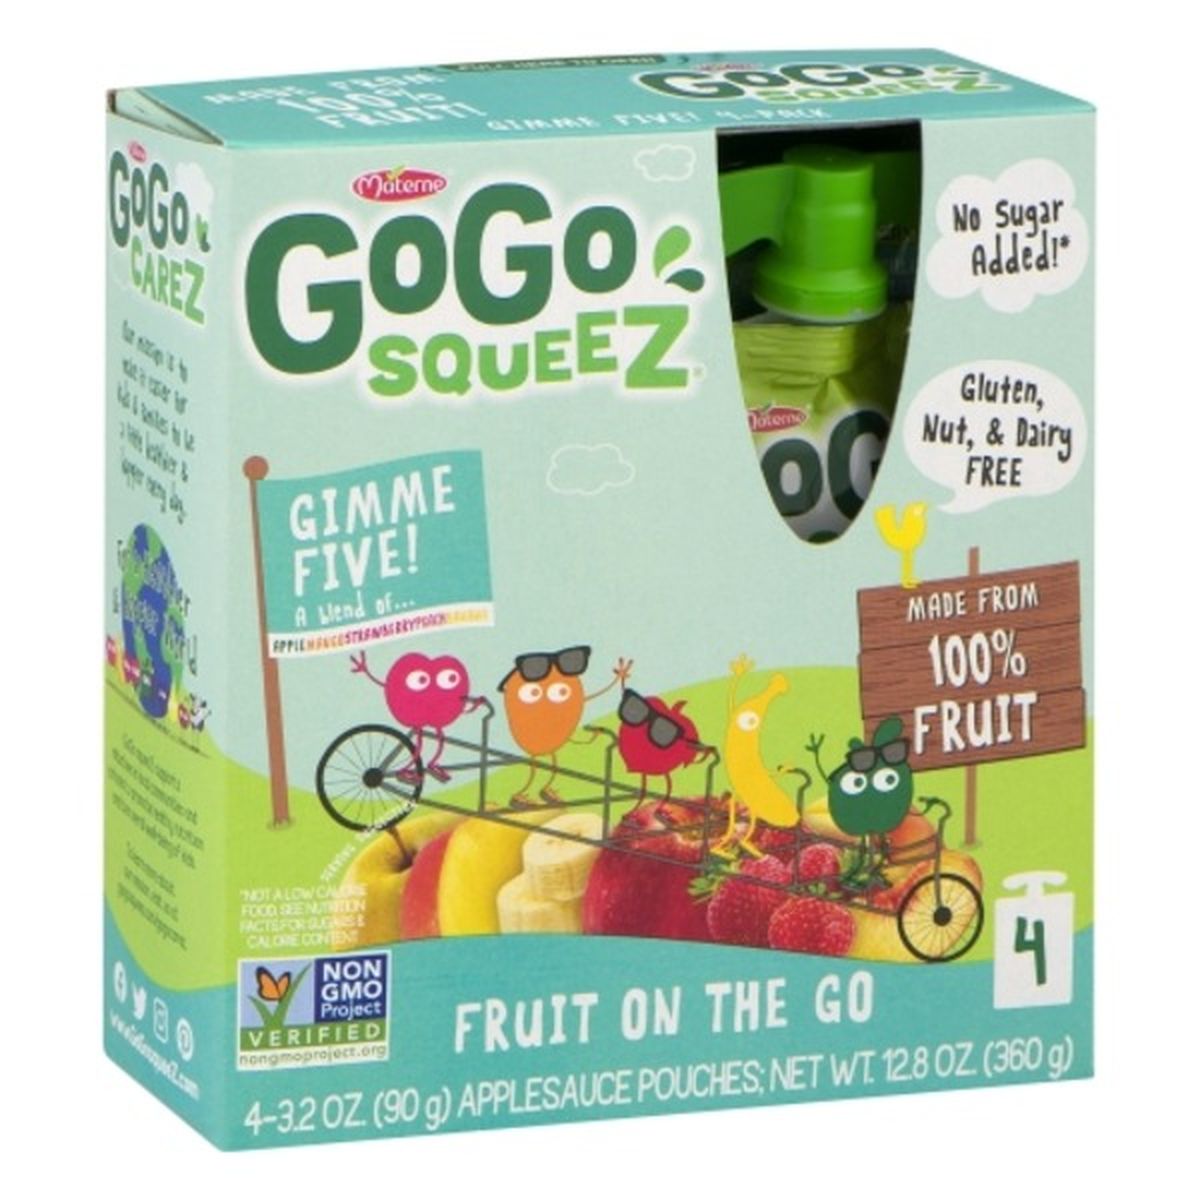 Calories in GoGo Squeez Applesauce, Gimme Five, 4 Pack